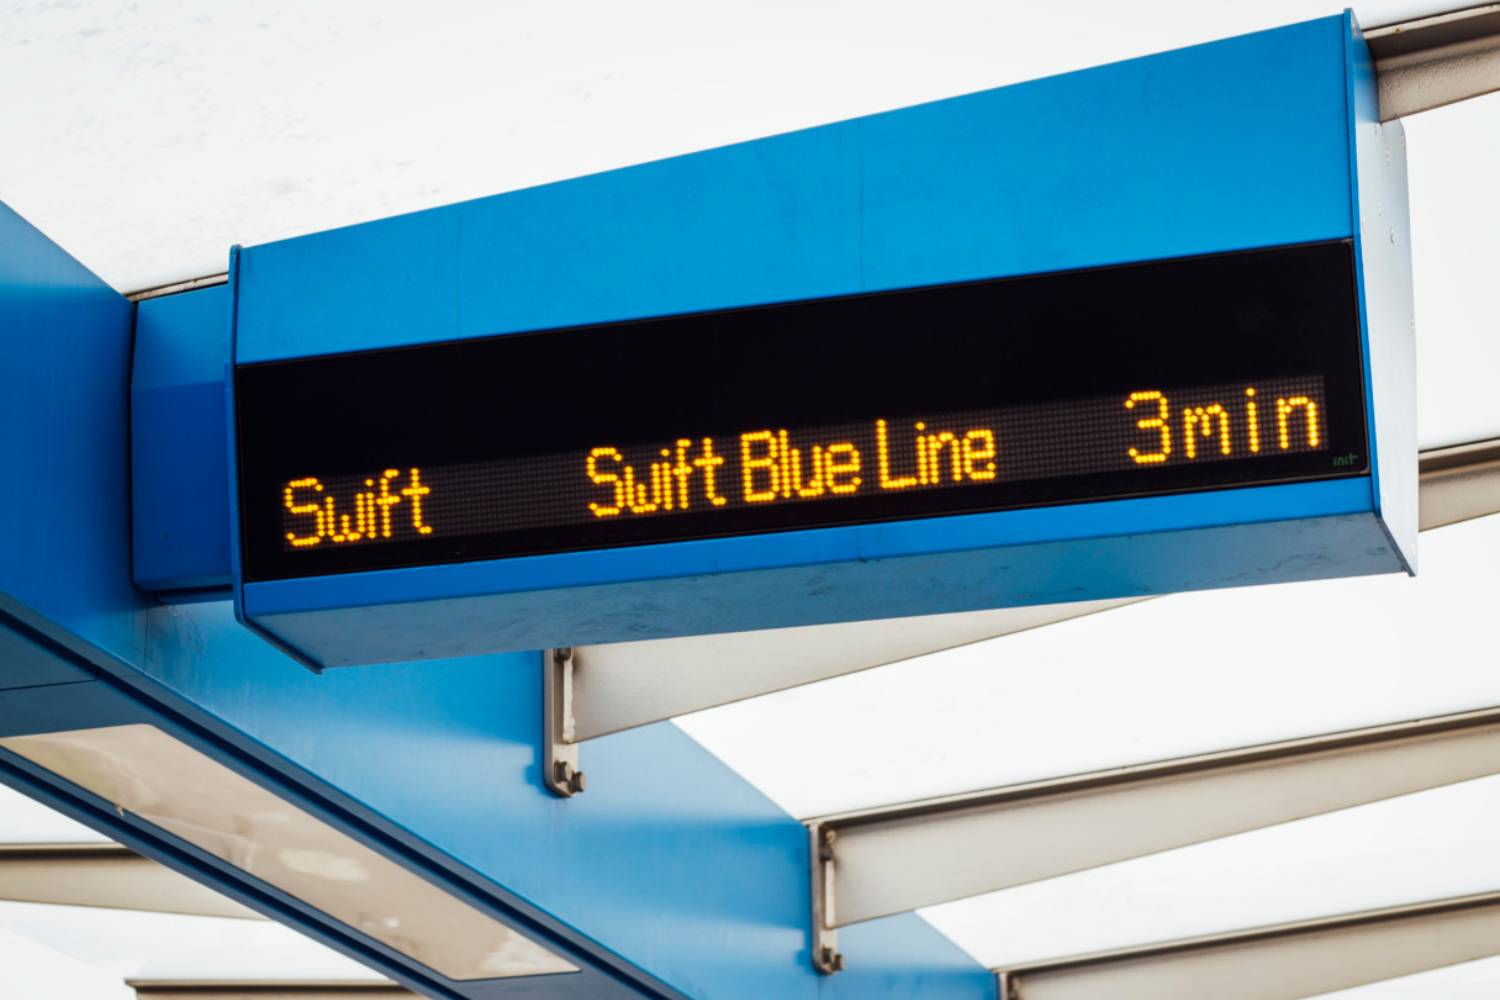 A digital sign at a Swift Blue Line station shows a bus will arrive in 3 minutes